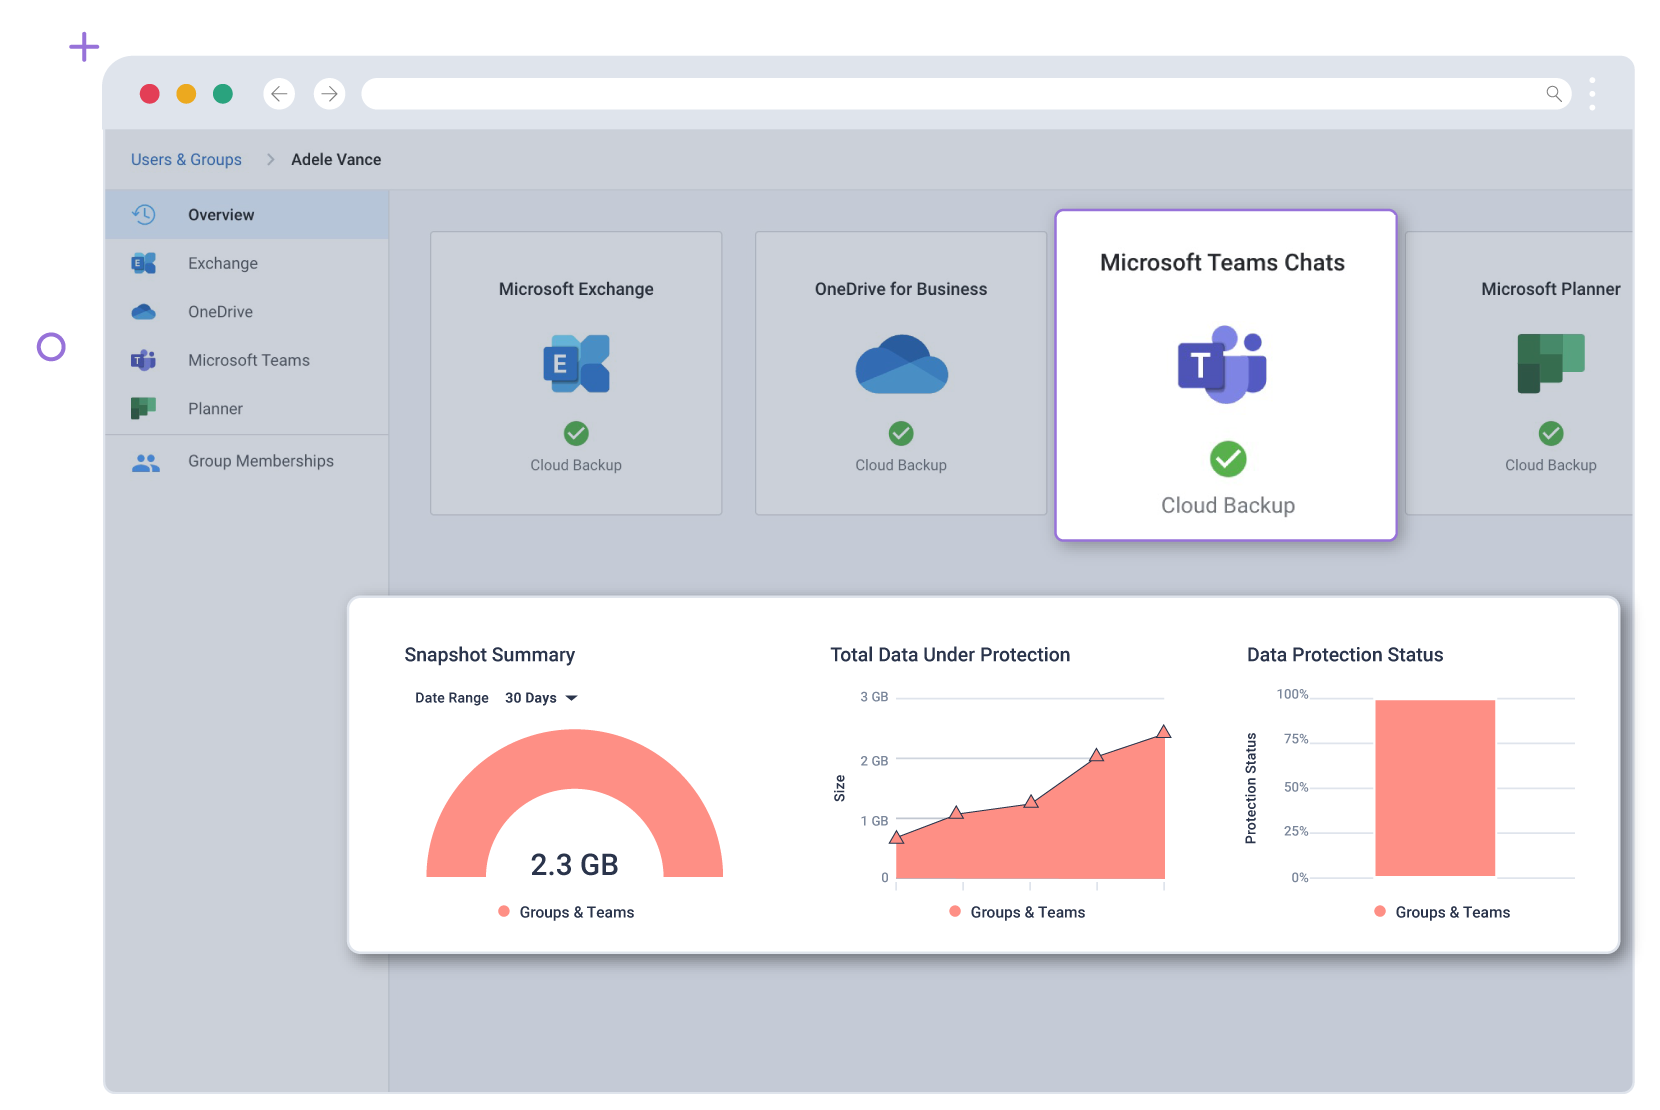 Product screen showing Microsoft Teams being selected, plus graphs of snapshot summary, total dta and protection status